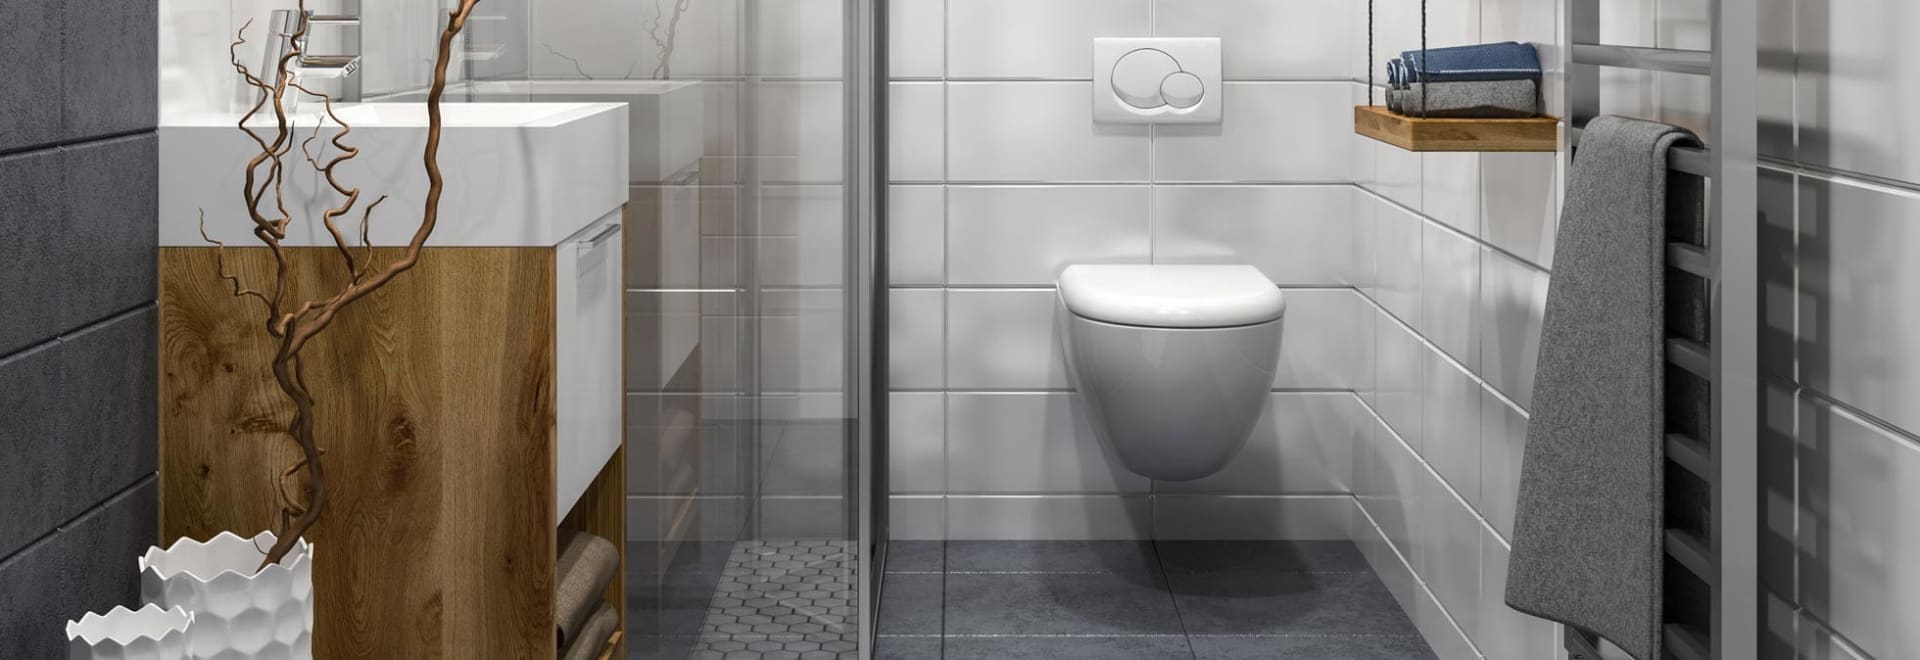 Wall-mounted toilets have a number of pros and cons.